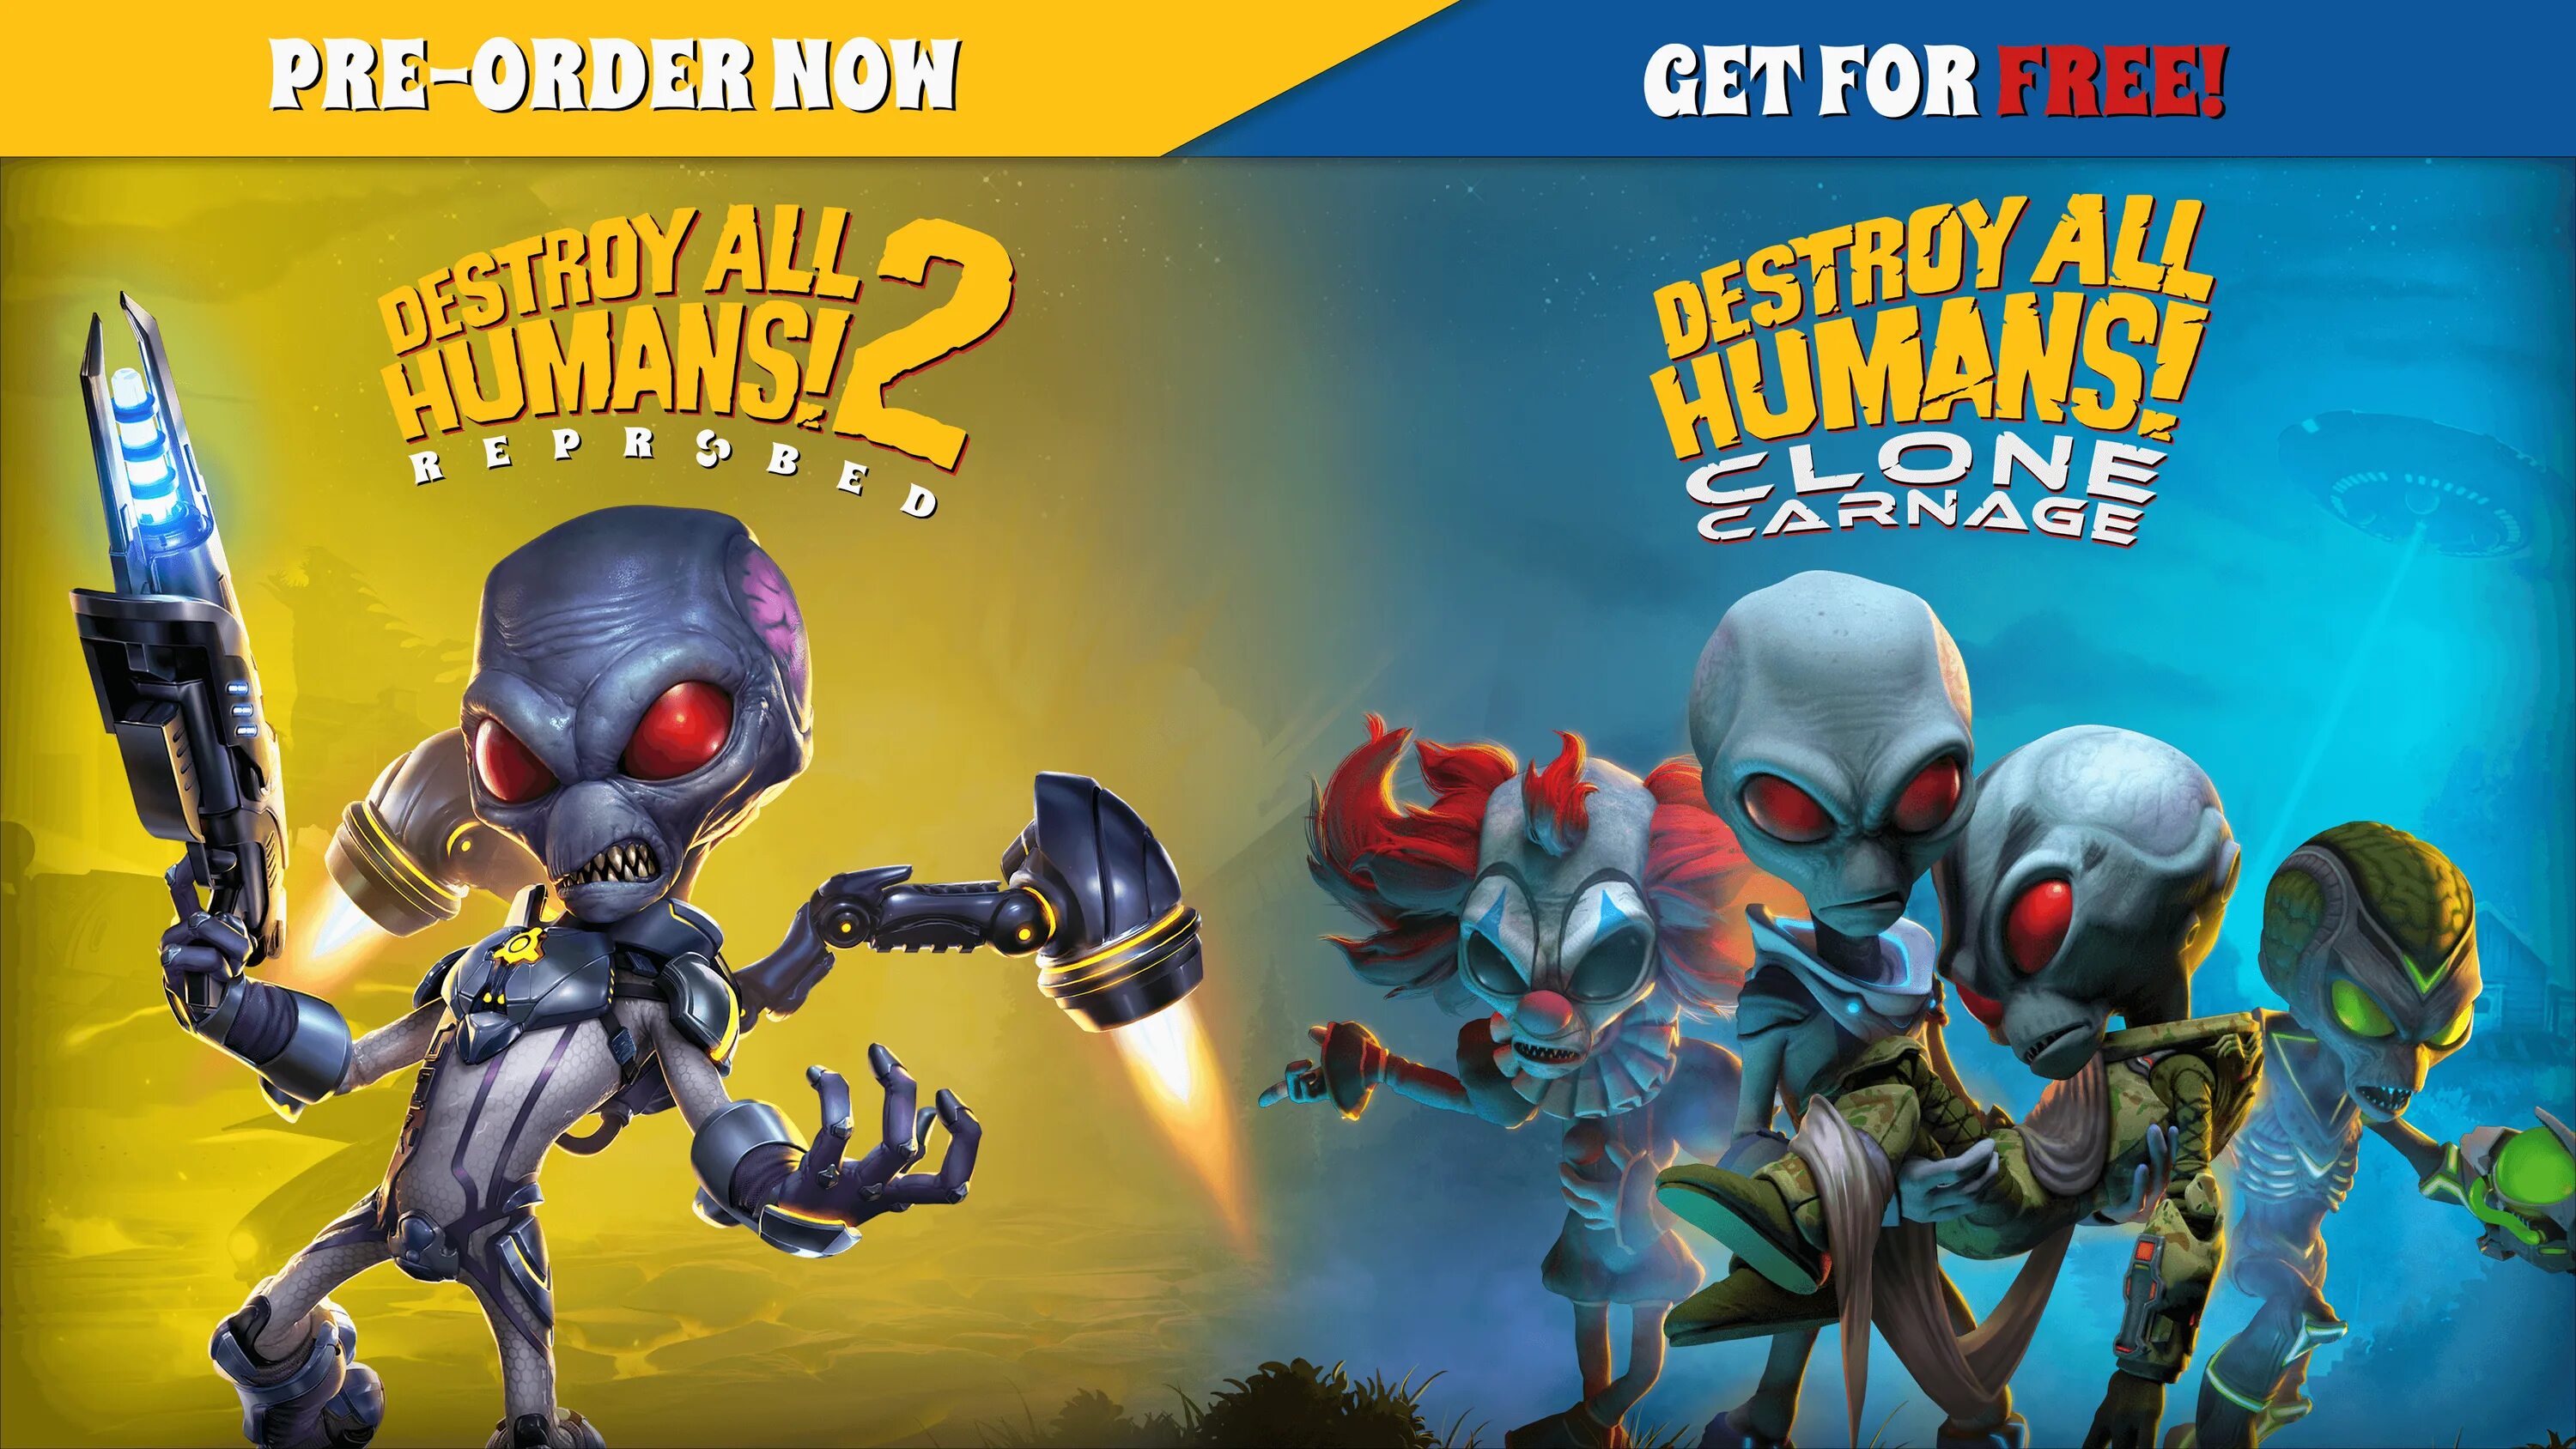 All humans 2 reprobed. Destroy all Humans 2 reprobed. Destroy all Humans!. Крипто destroy all Humans. Игра destroy all Humans! 2 Reprobed.